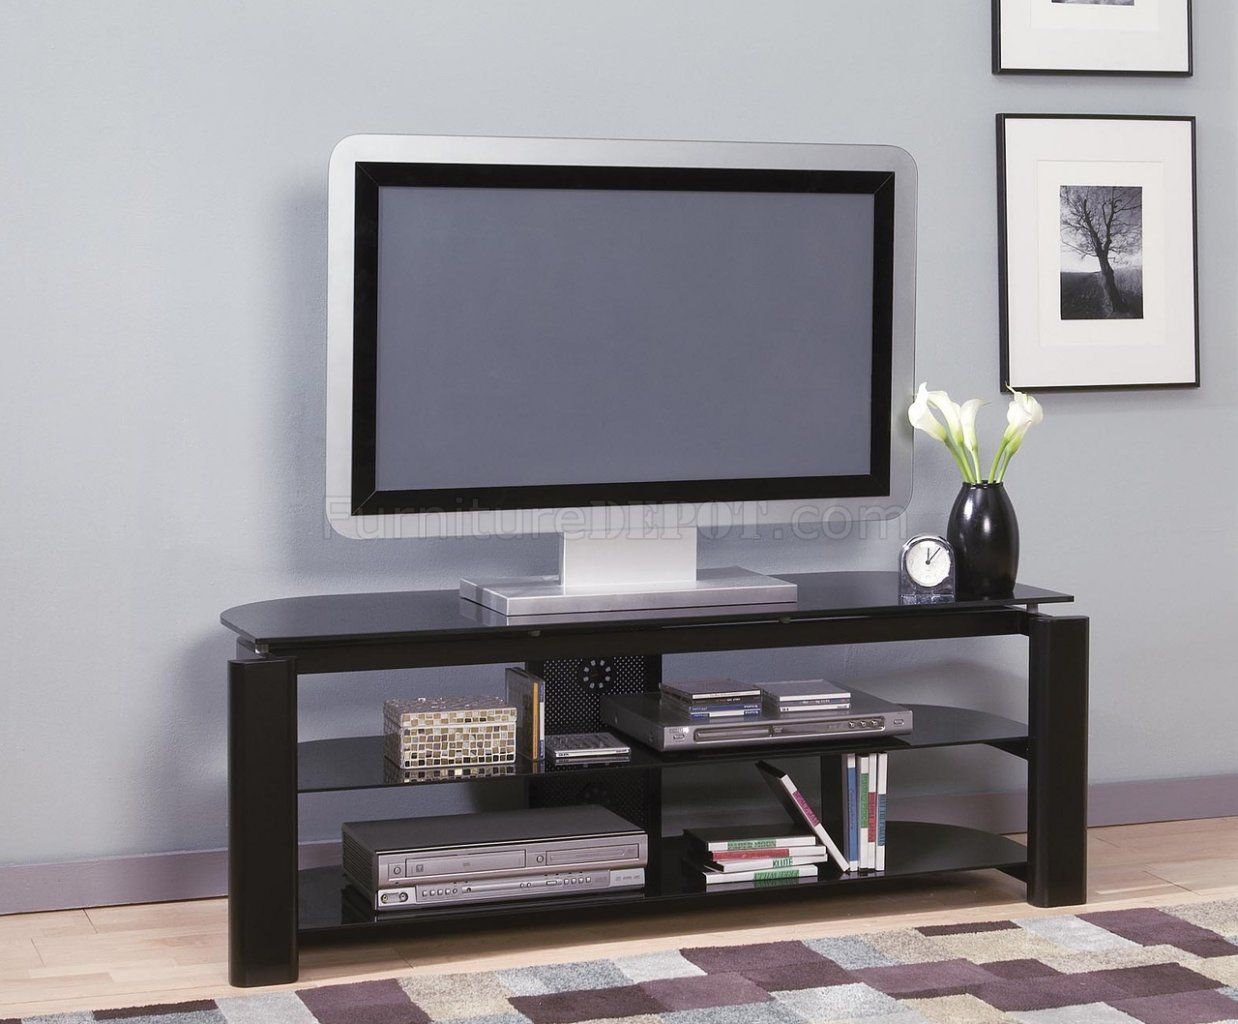 Black Glass & Metal Modern Tv Stand W/storage Shelves Within Modern Tv Stands With Mount (View 14 of 15)